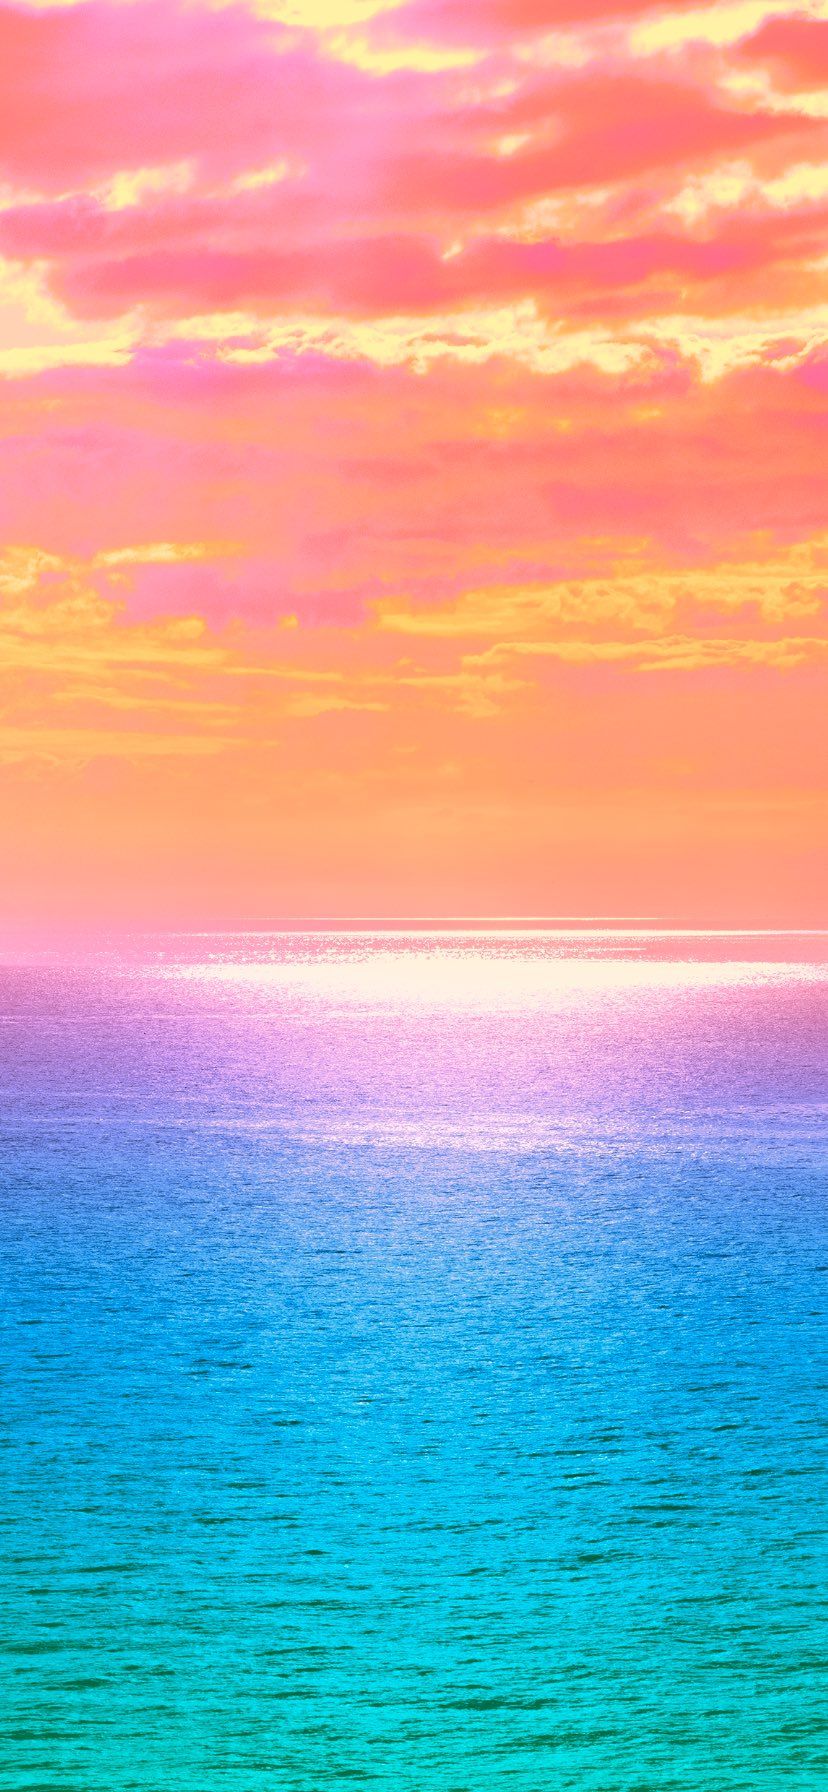 A colorful sunset over the ocean - Tropical